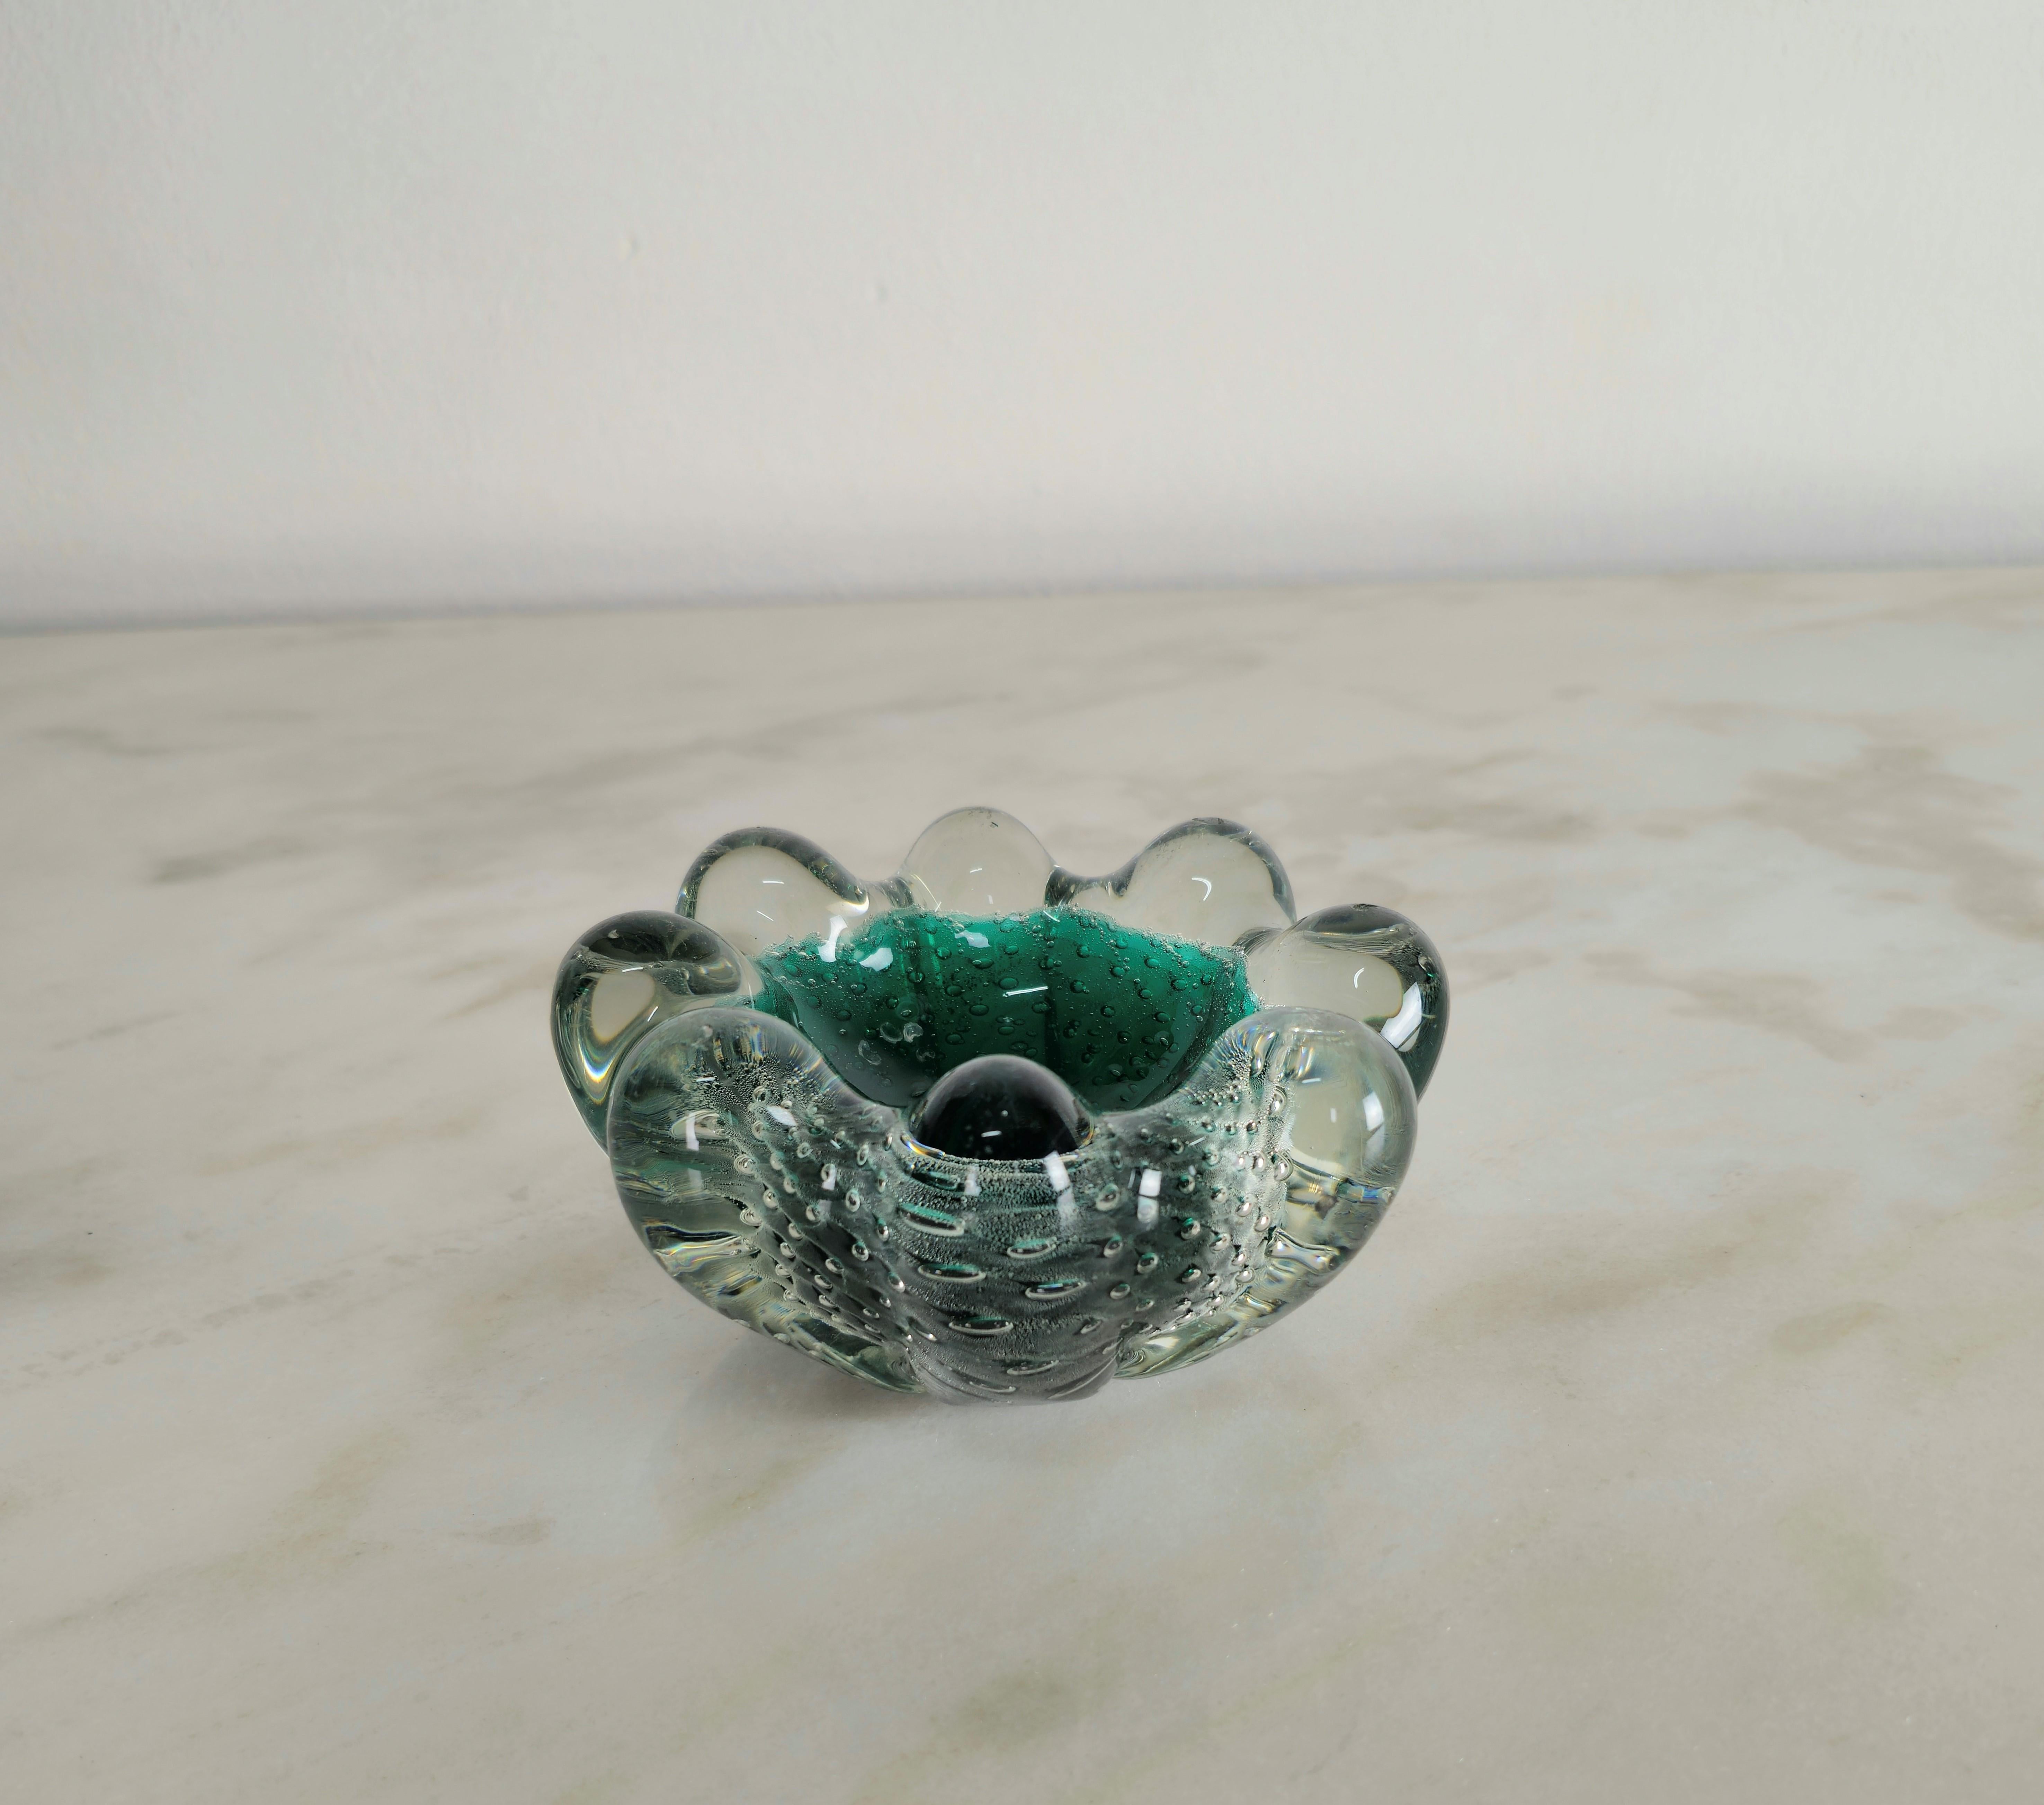 Small decorative object produced in Italy in the 1950s by Seguso Vetri d'Arte.
The object was made of sommerso bullicante Murano glass in shades of transparent and emerald green.

